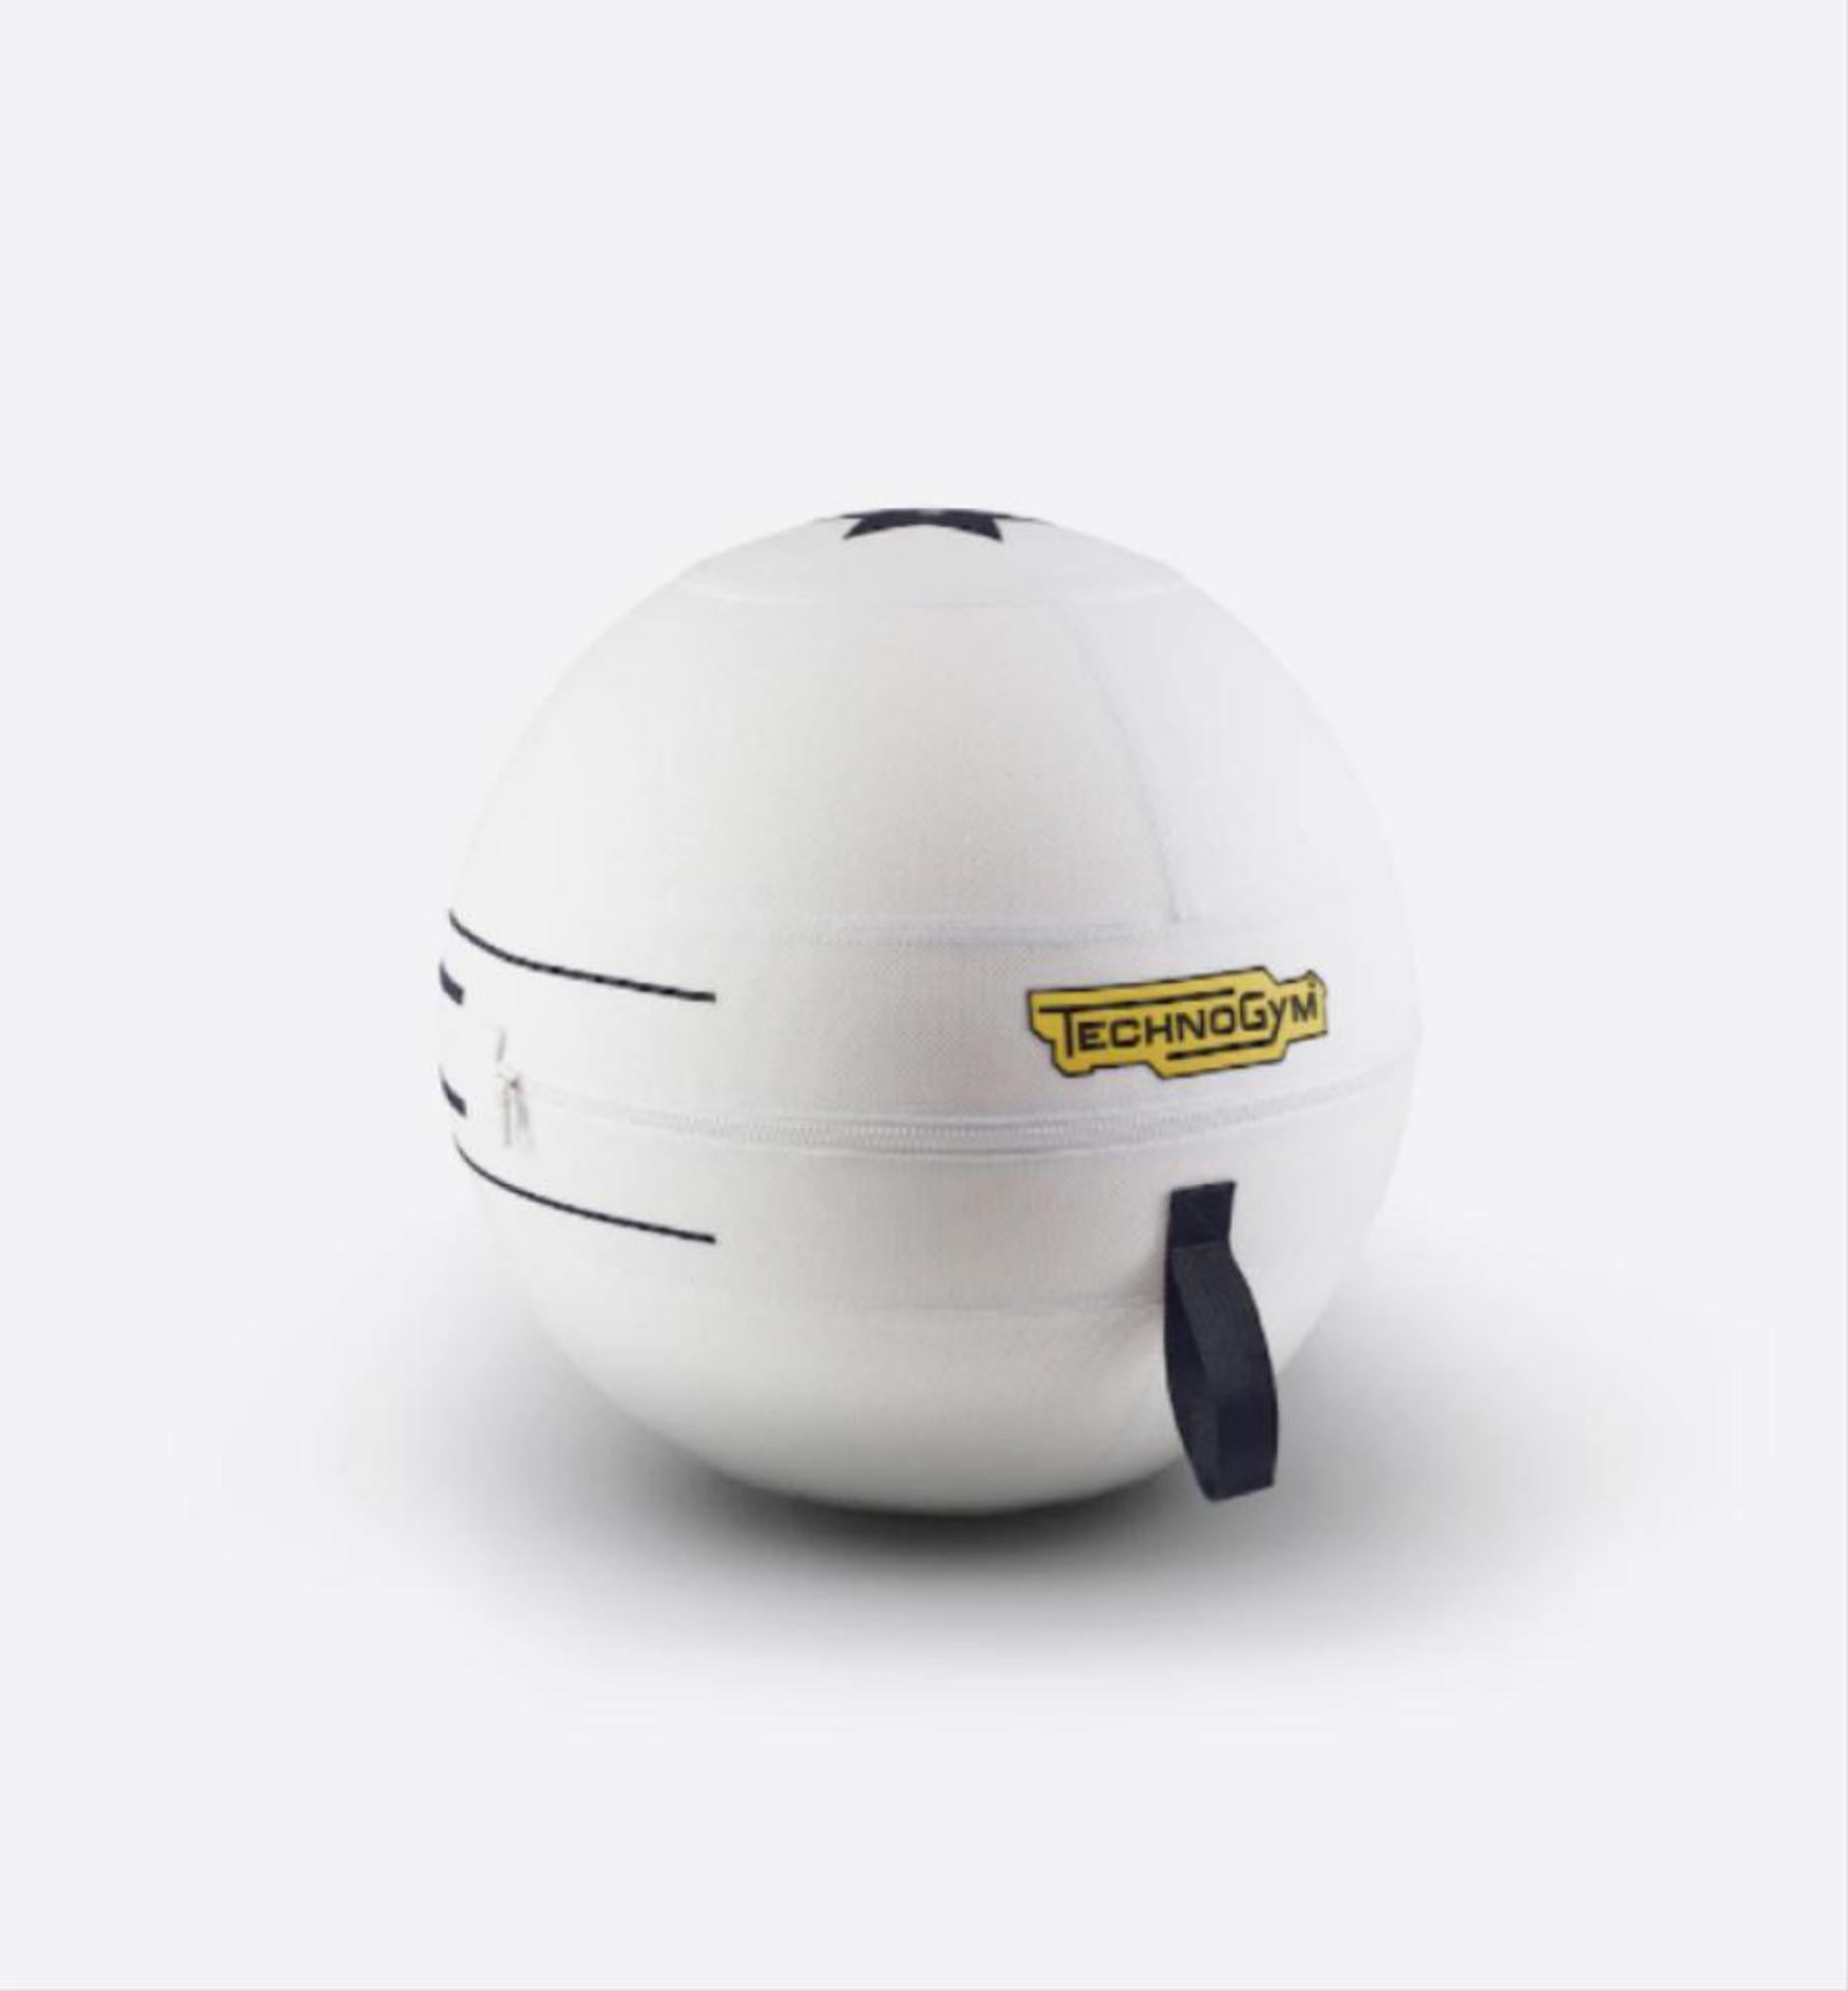 Dior Limited Edition White Logo Technogym Gym Ball for Dior Yoga 128DIOR In New Condition In Dix hills, NY